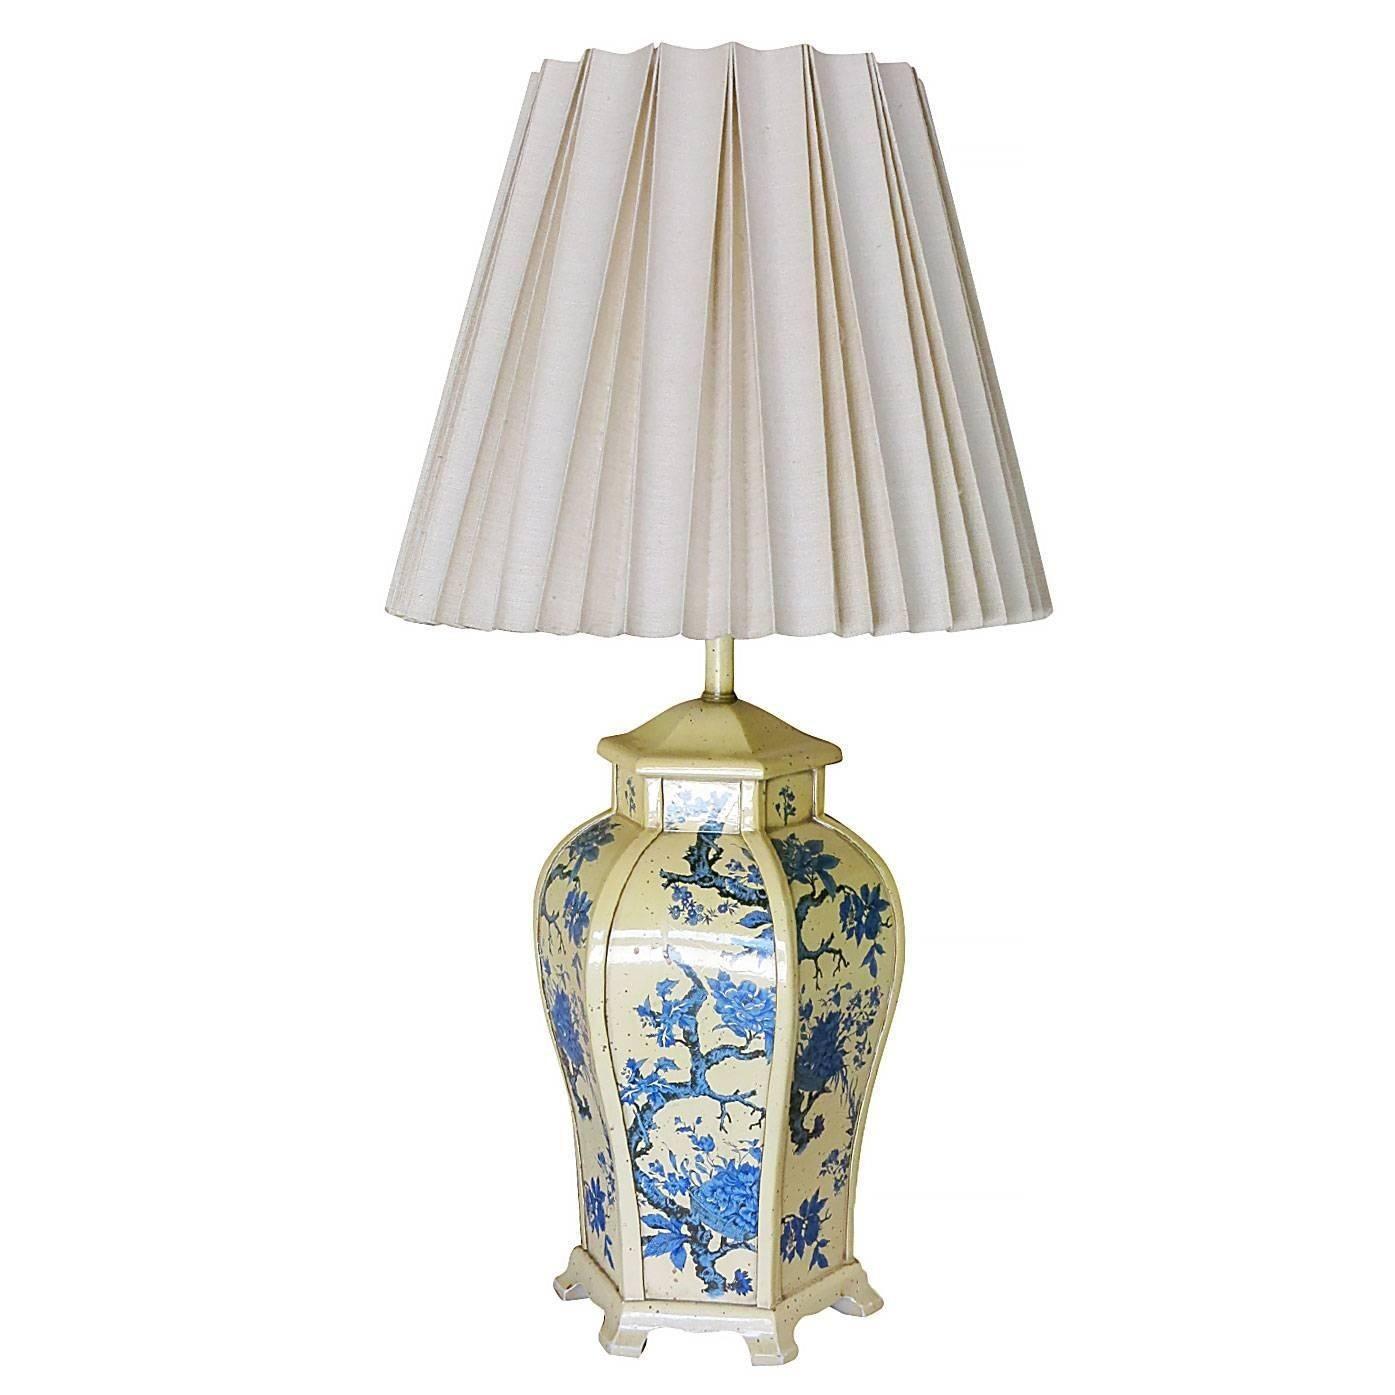 James Mont style metal lamp pair with Asian inspired enamel finish featuring a floral like design of a Bonsai with a cream color background.

With a mix of modernist design and classical Asian murals this lamp is sure to work in a variety of